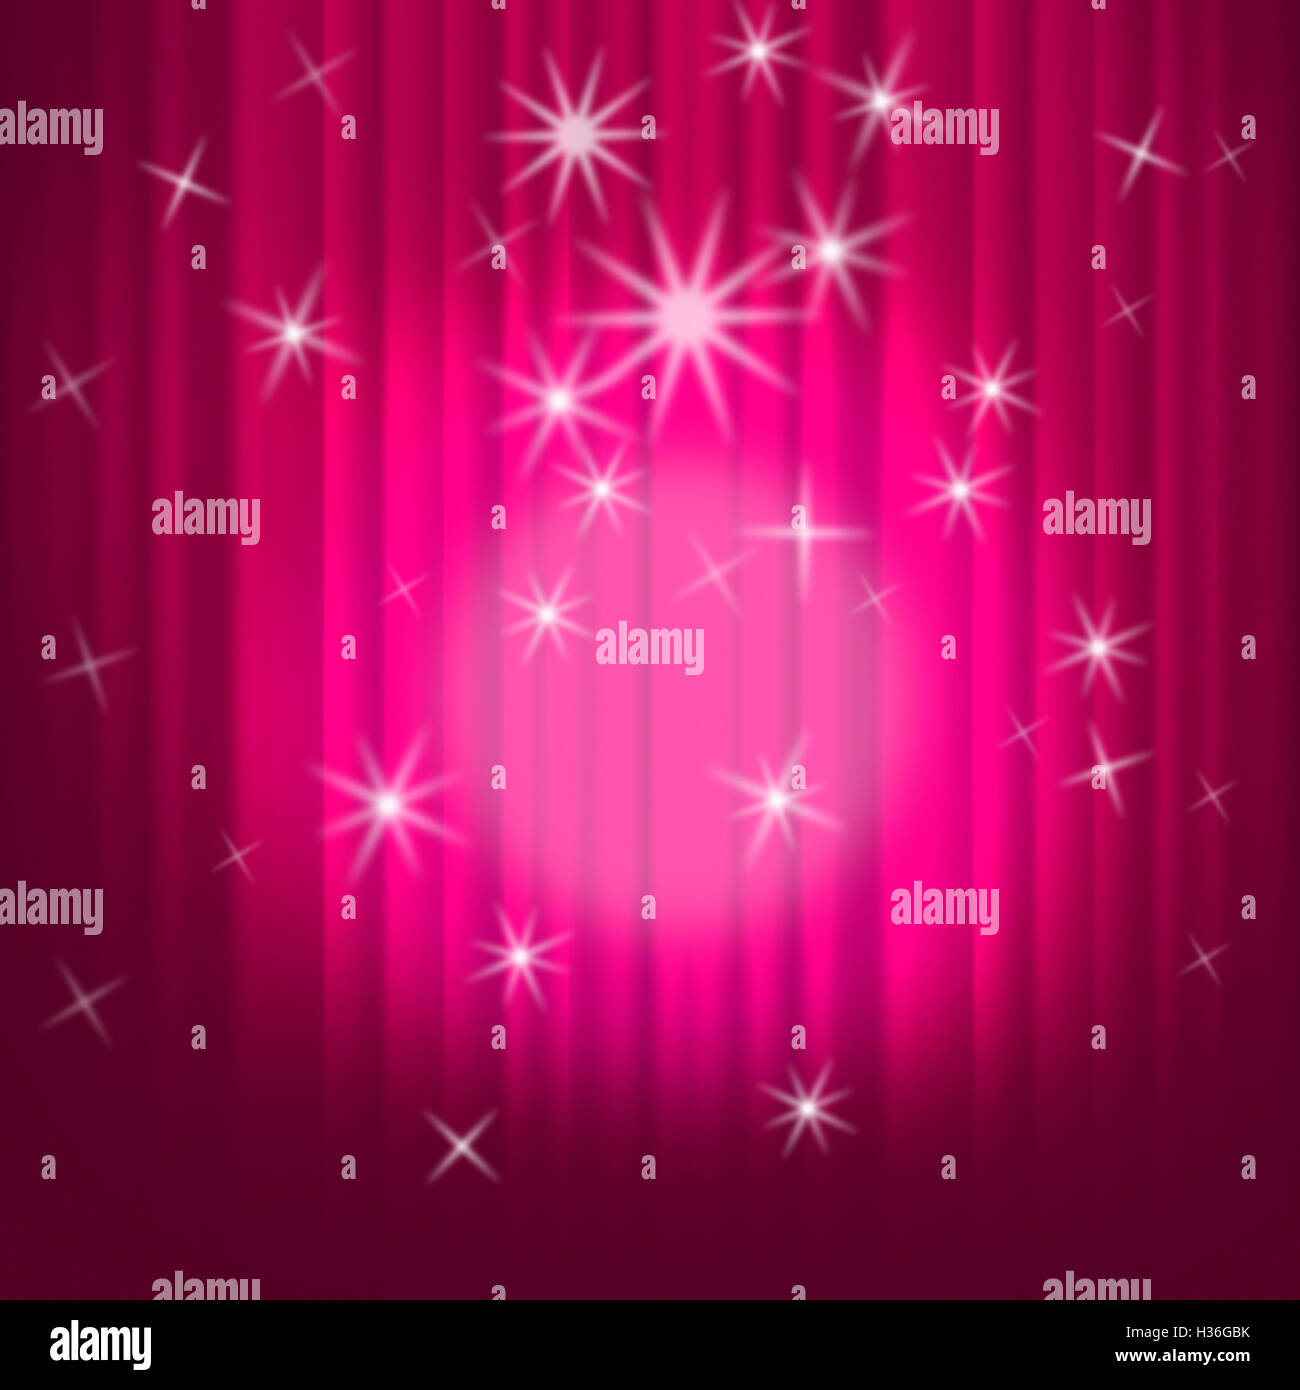 Closed Curtains Background Shows Theatre Performance Or Stage Stock Photo